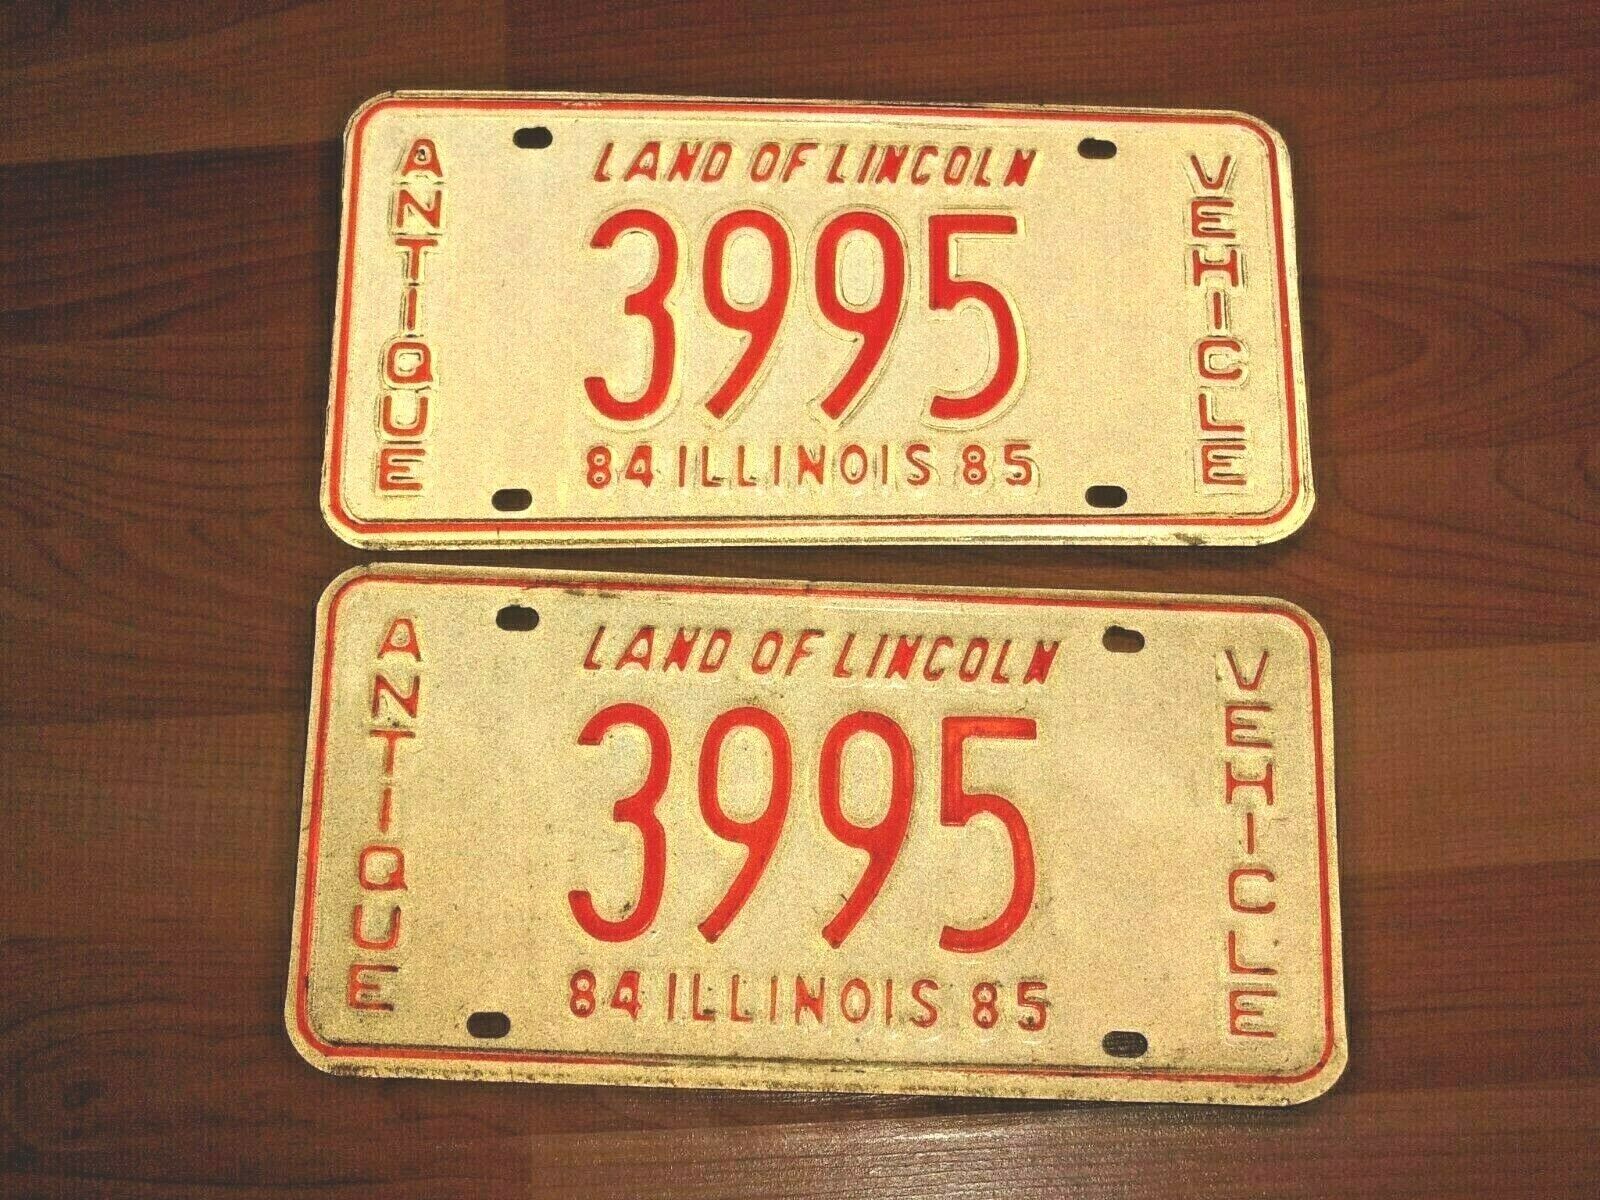 Rare Matched Pair 1984-85 Illinois Antique Vehicle (3995) License Plates Tags